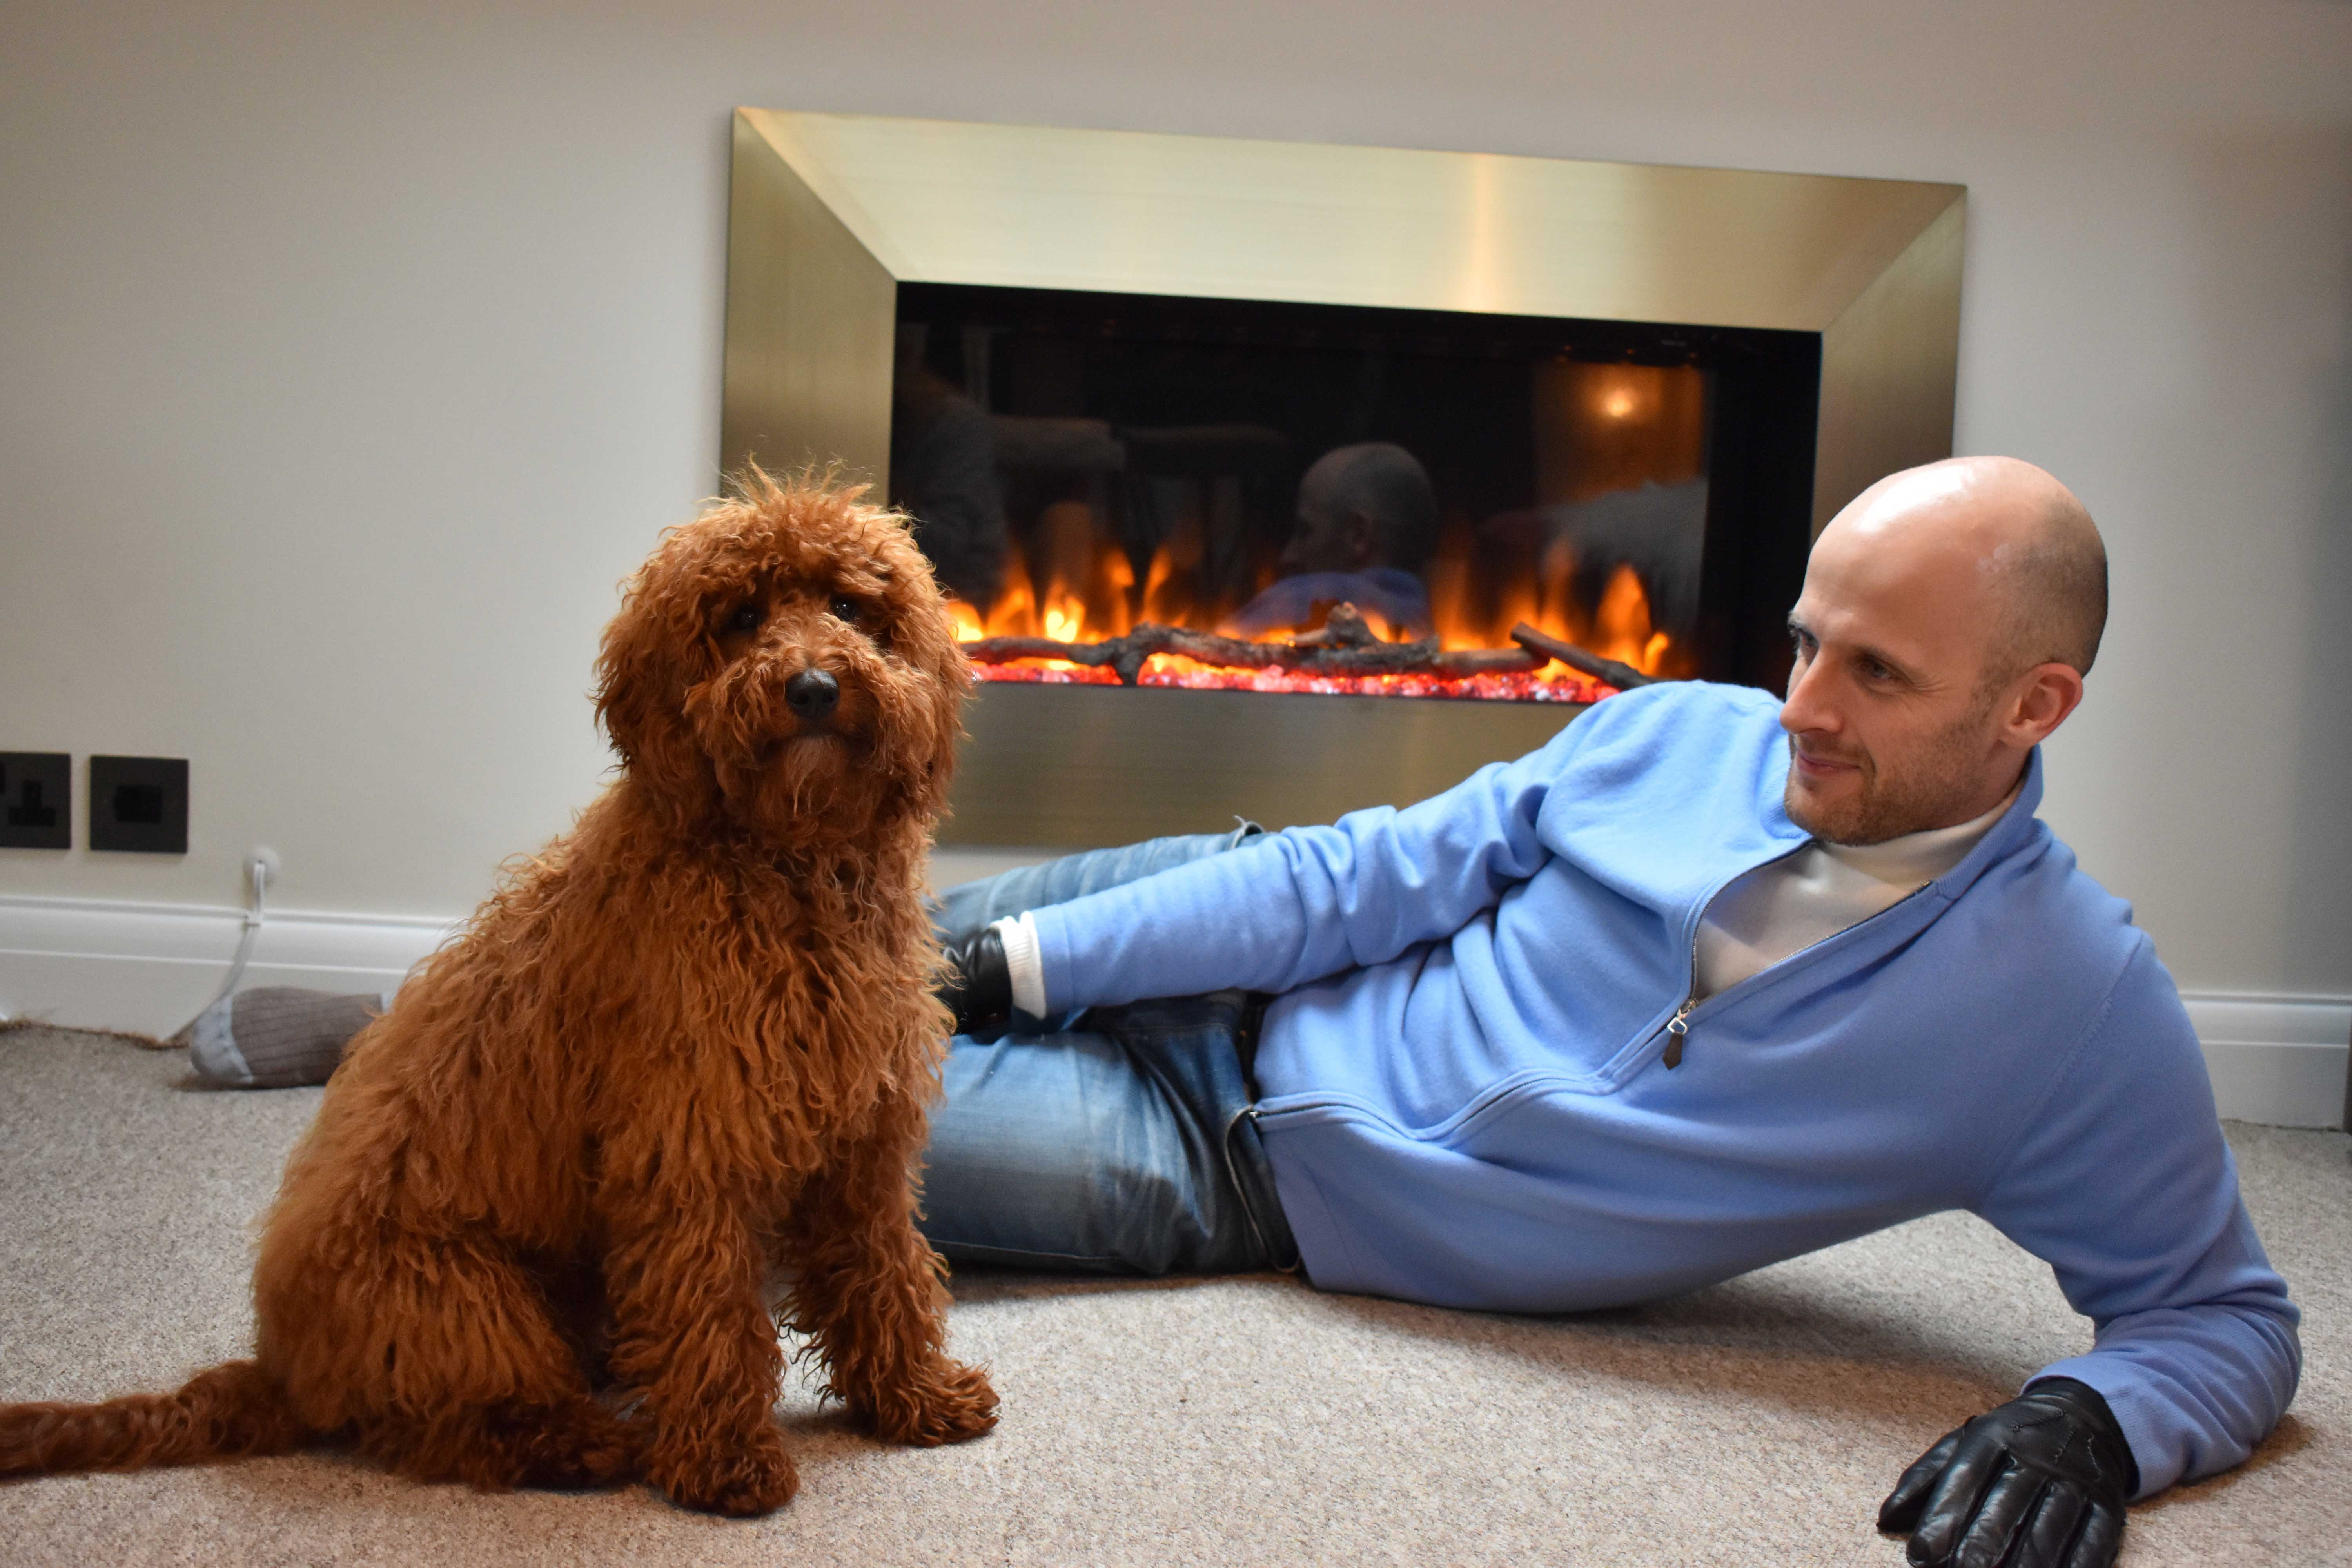 Me posing by fireplace with Roger the dog 